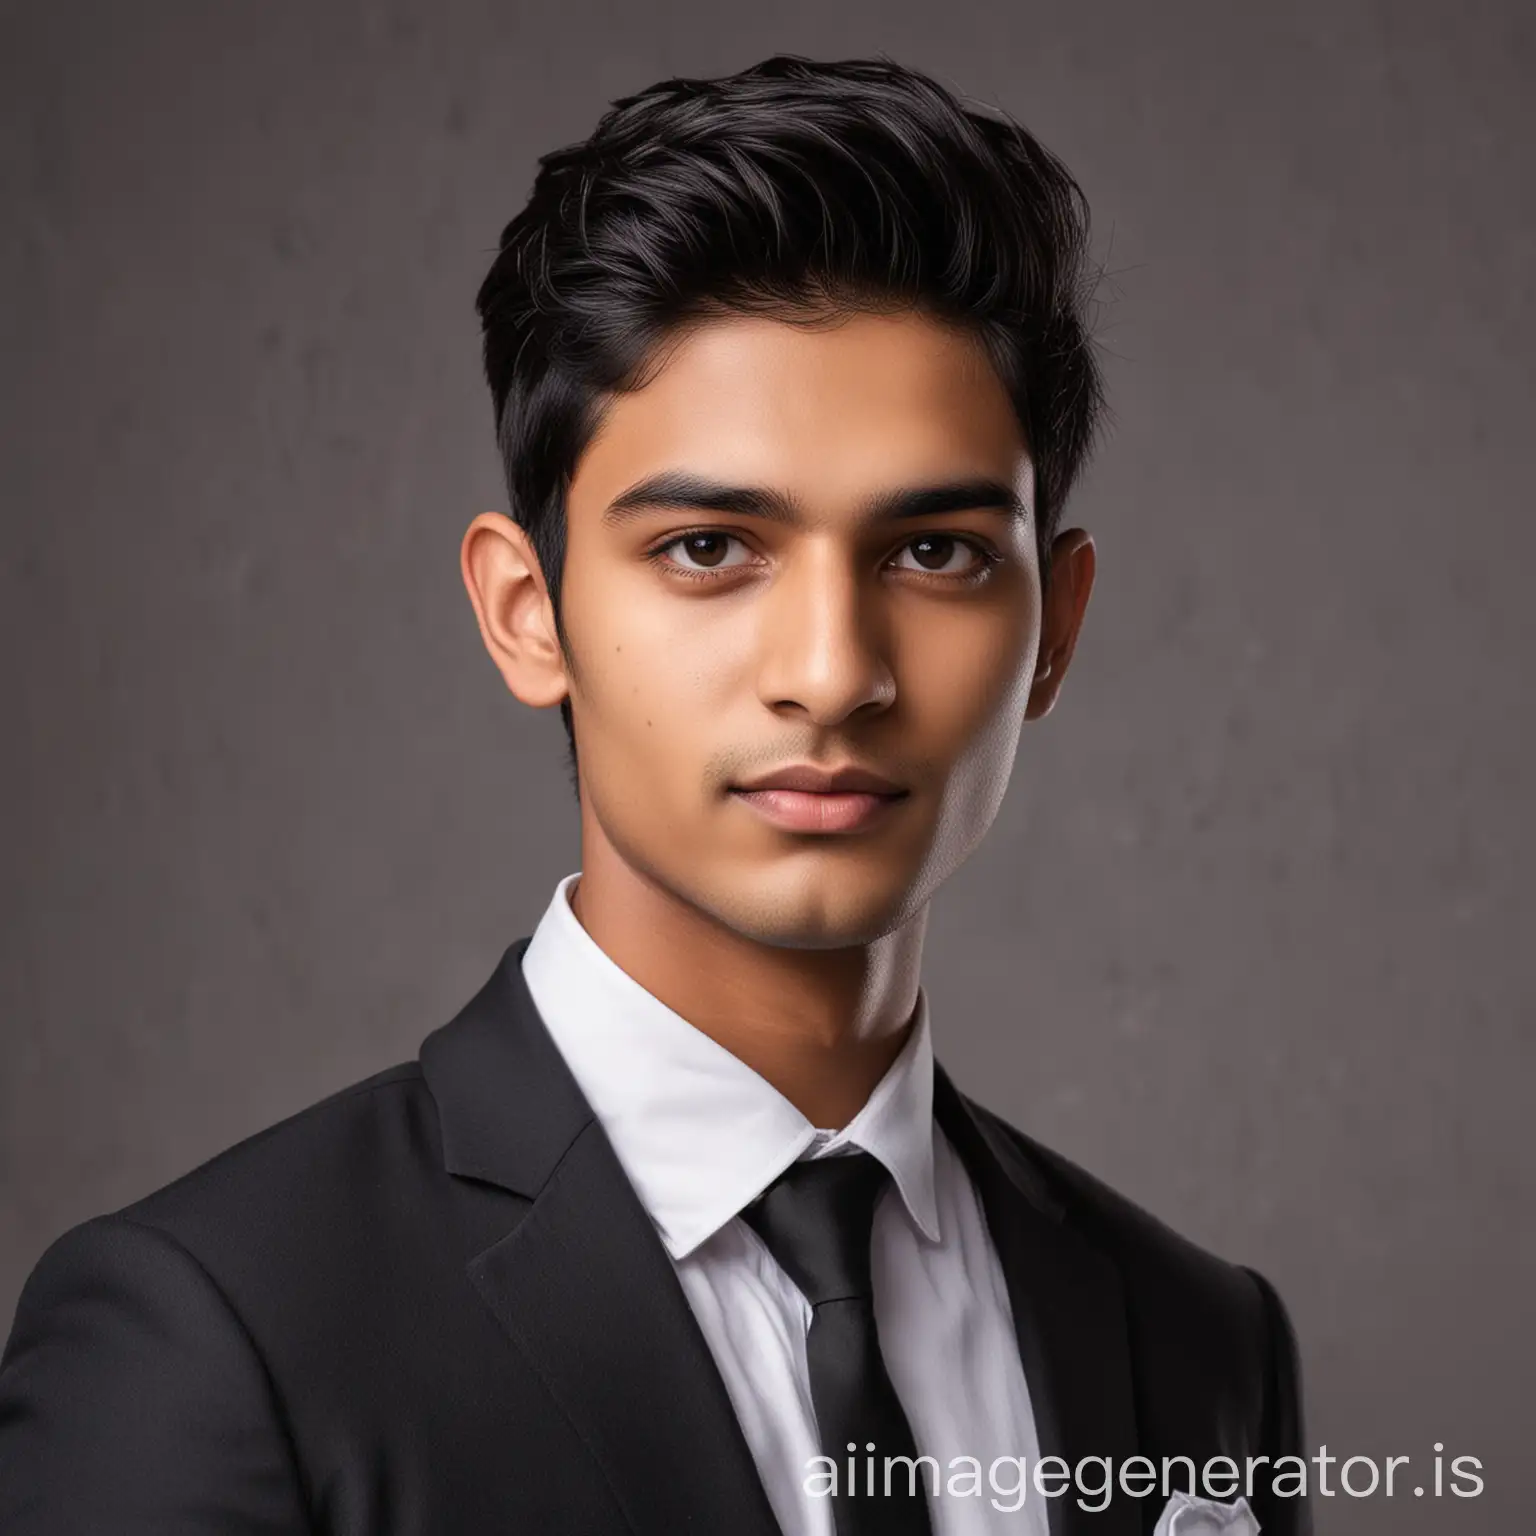 Young-Indian-Male-Posing-for-LinkedIn-Photo-in-Formal-Attire